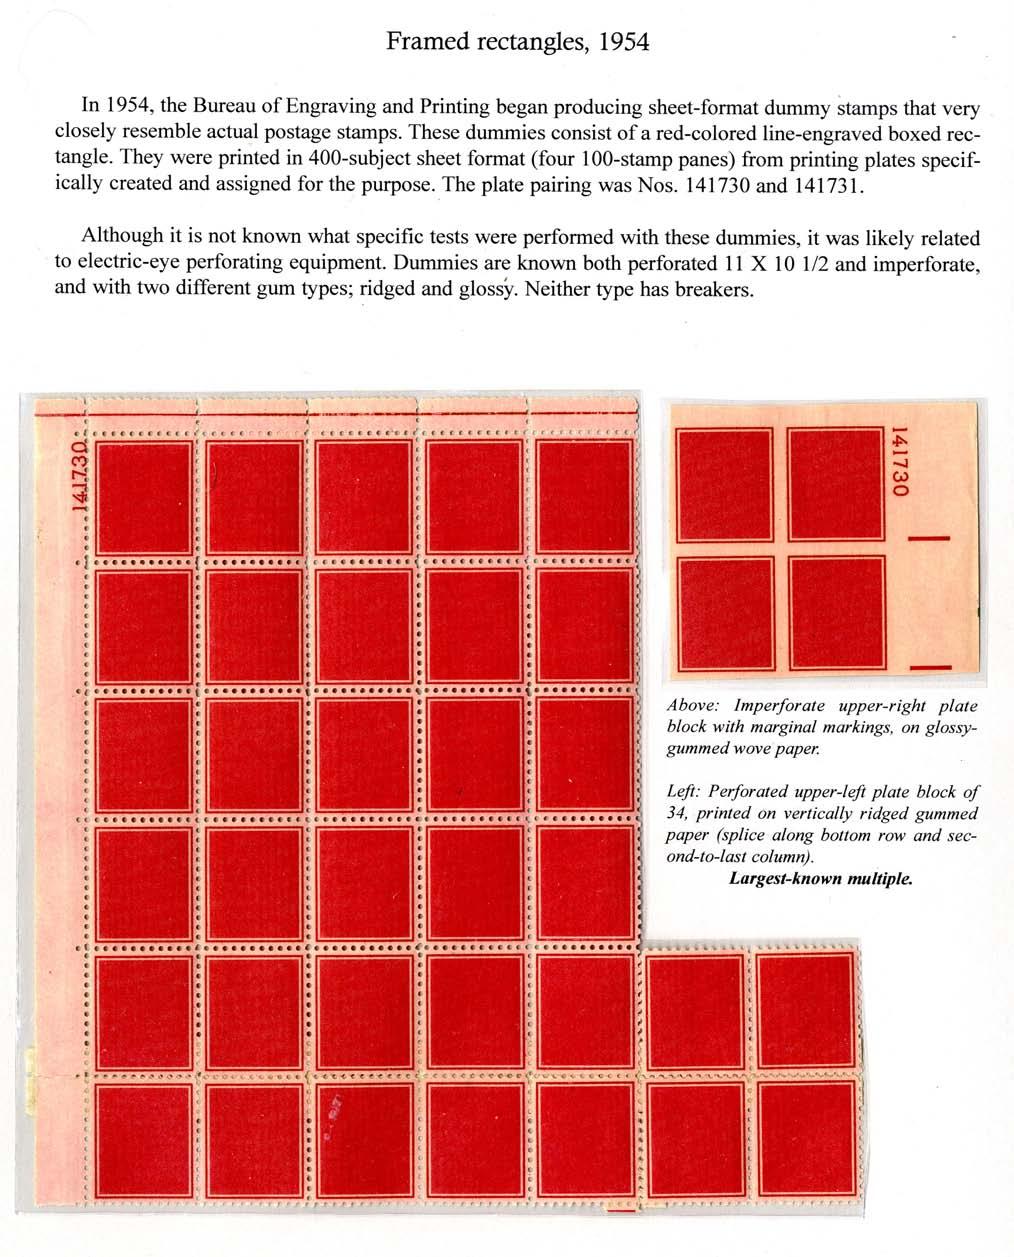 The above page from Joan Lenz s exhibit contains the Largest-known block (34) of